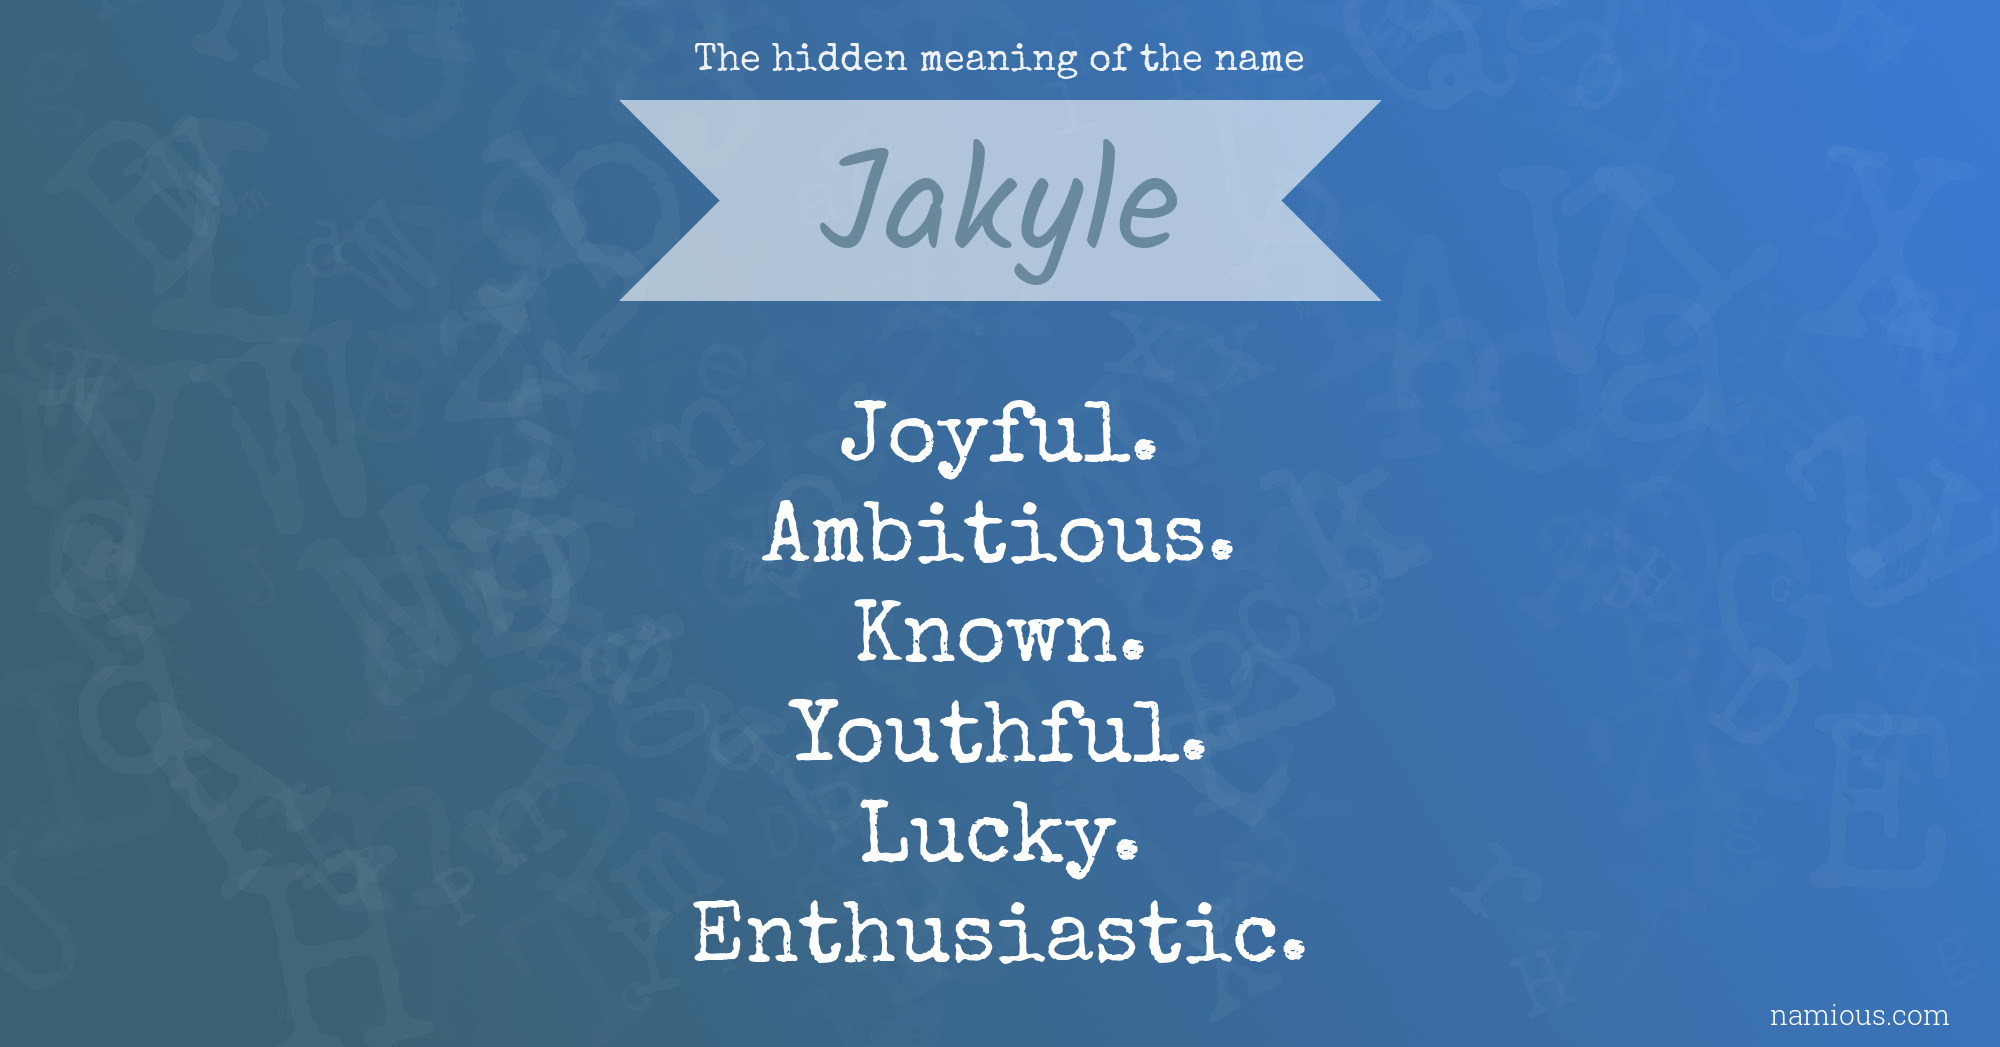 The hidden meaning of the name Jakyle